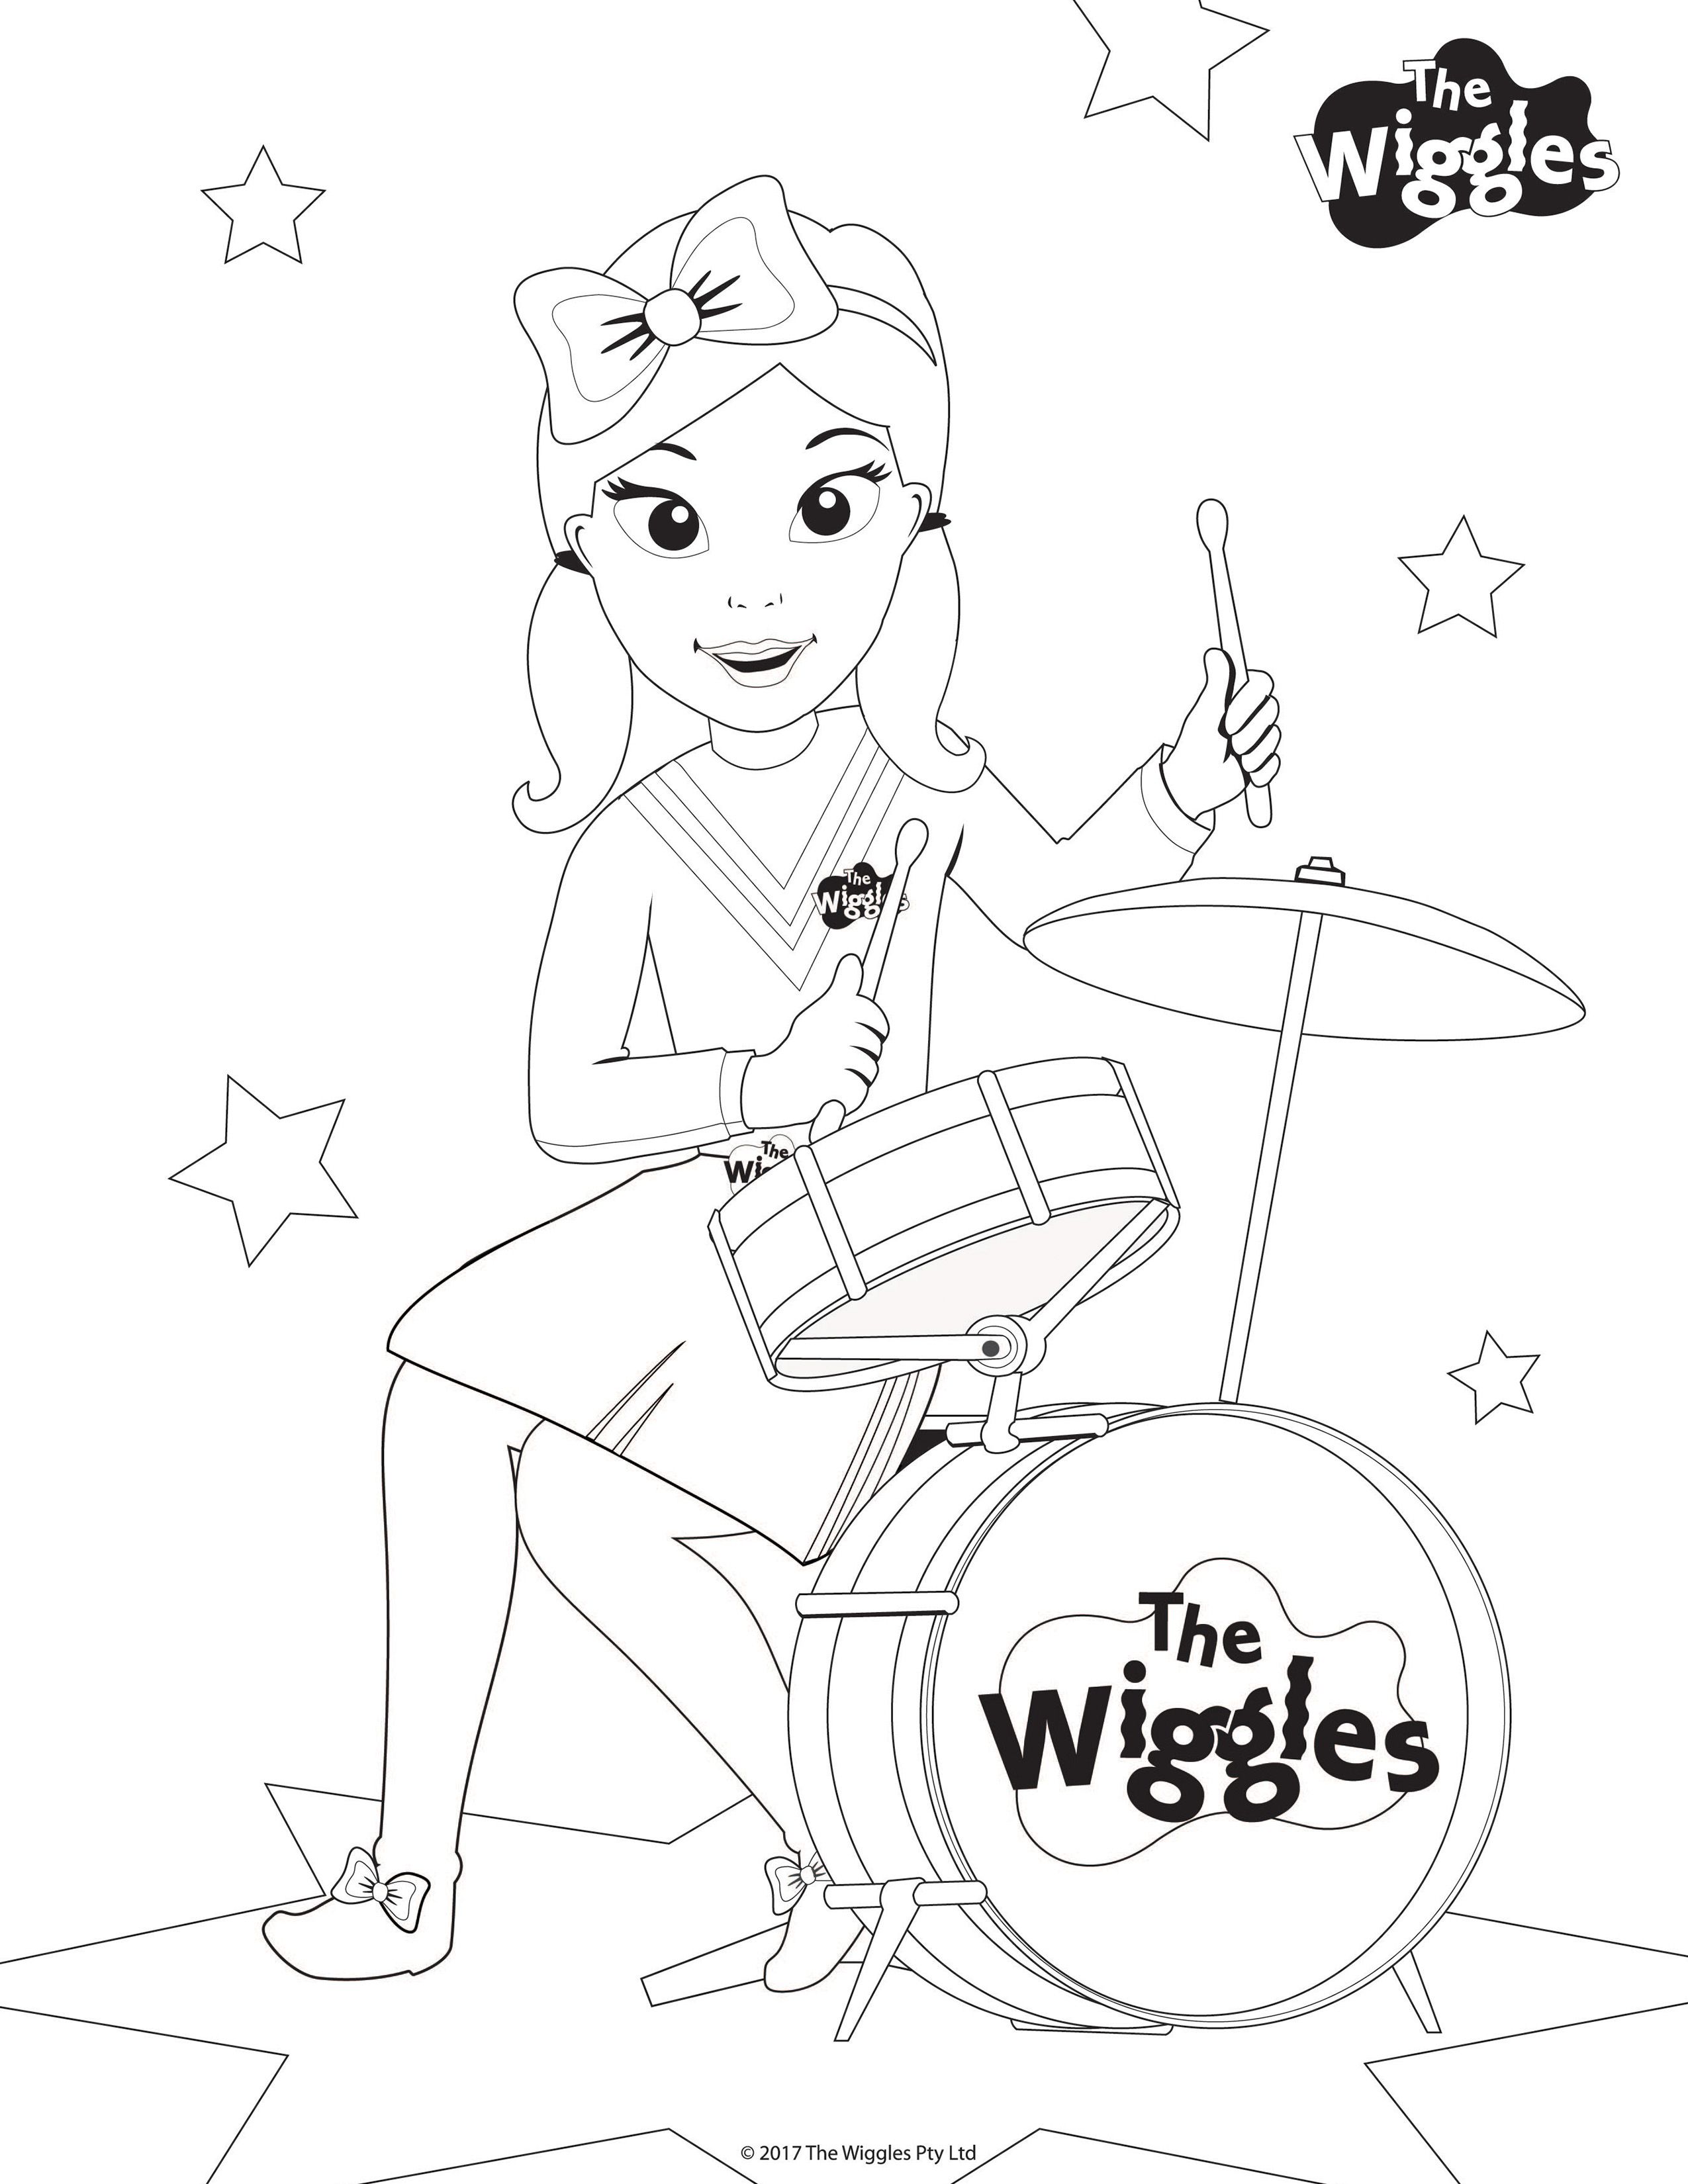 The Wiggles Activity: Color Emma the Drummer! in 2020 | Wiggles birthday,  Wiggles party, Emma wiggle